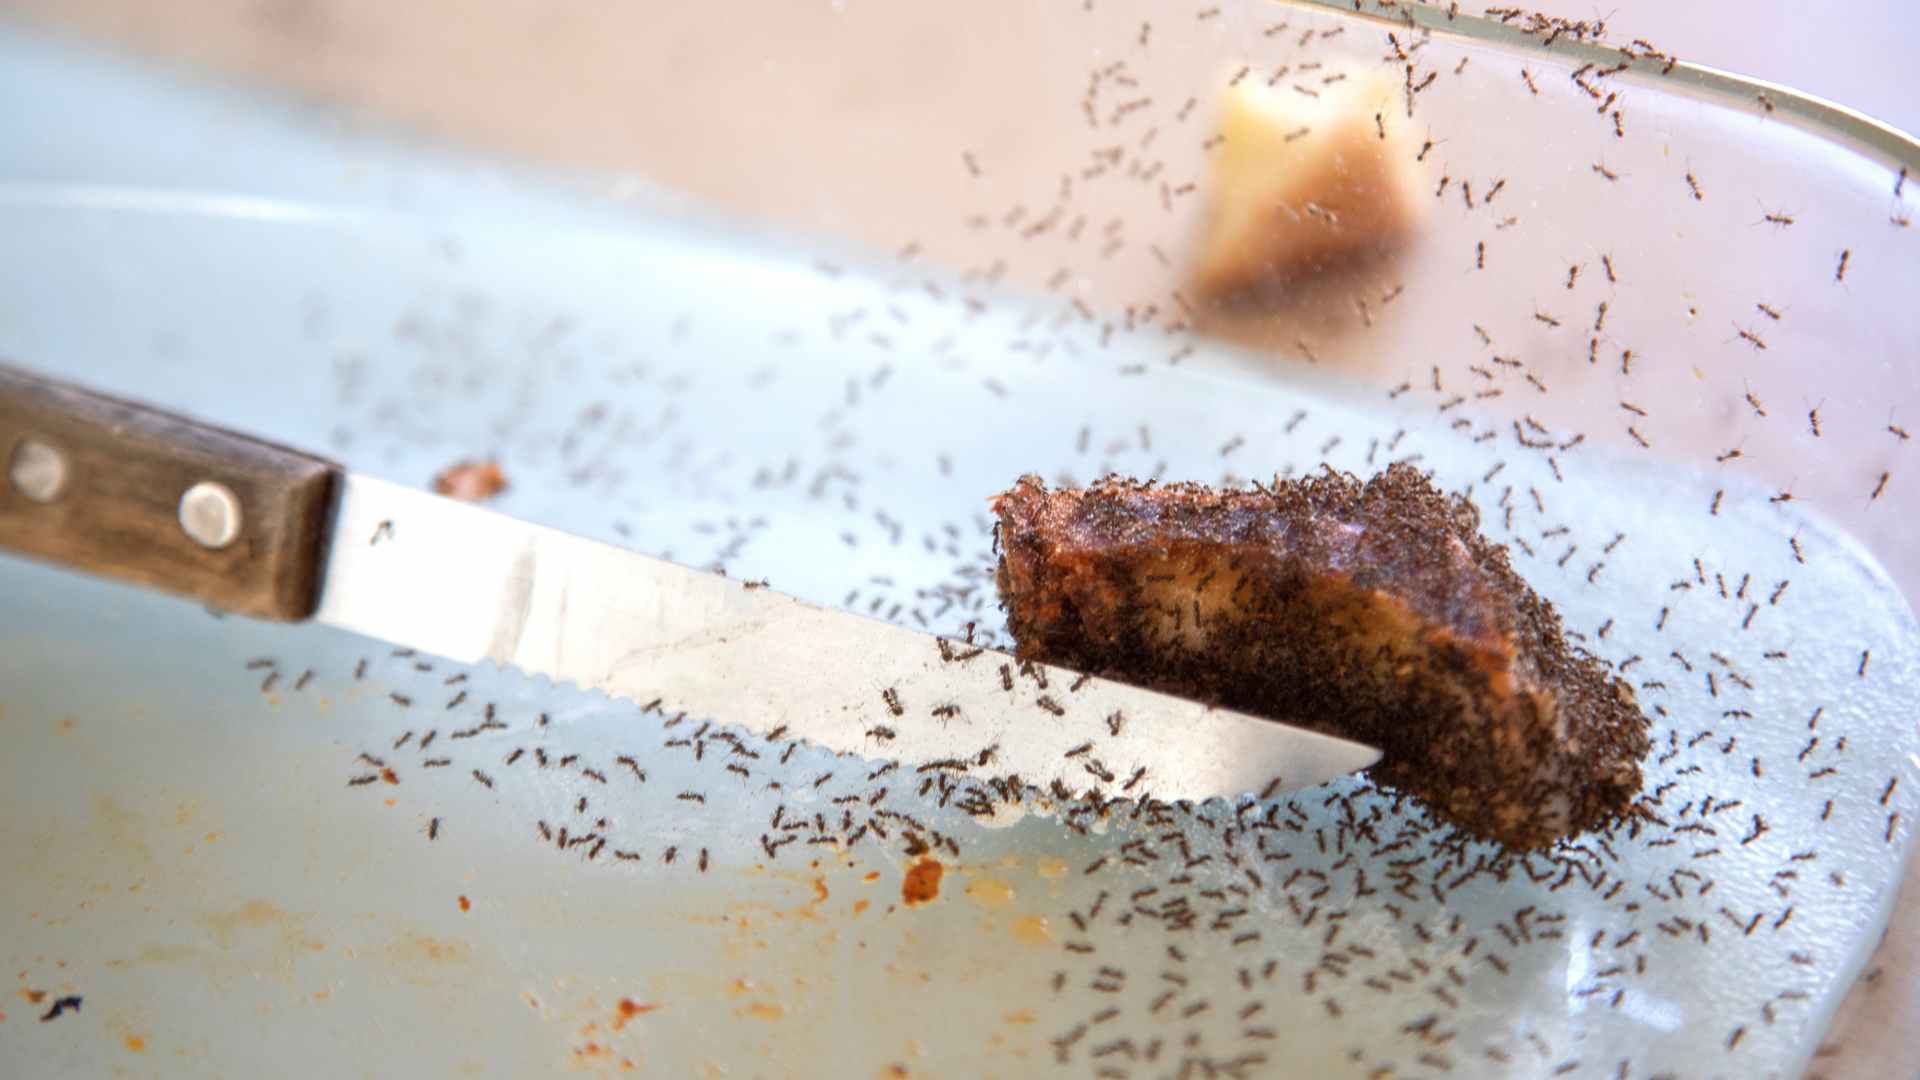 Ant Control Service in Southern California: Get Rid of Ants Today